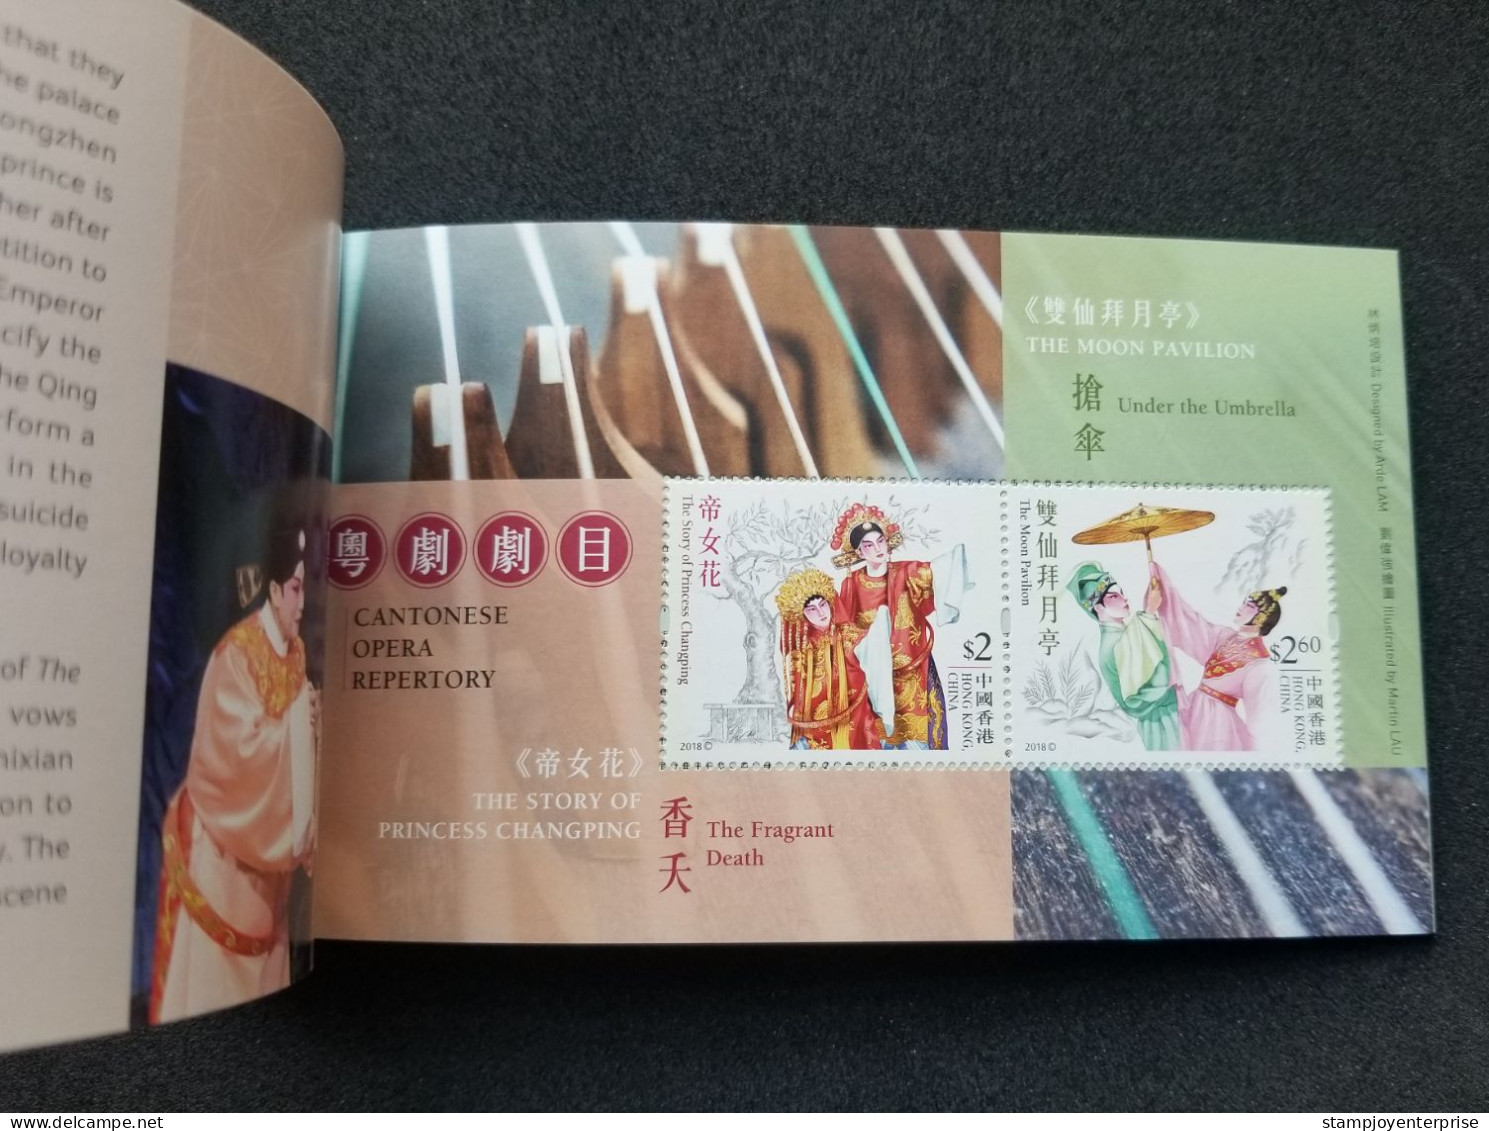 Hong Kong Chinese Cantonese Opera Repertory 2018 Costumes Art Culture (booklet) MNH - Unused Stamps